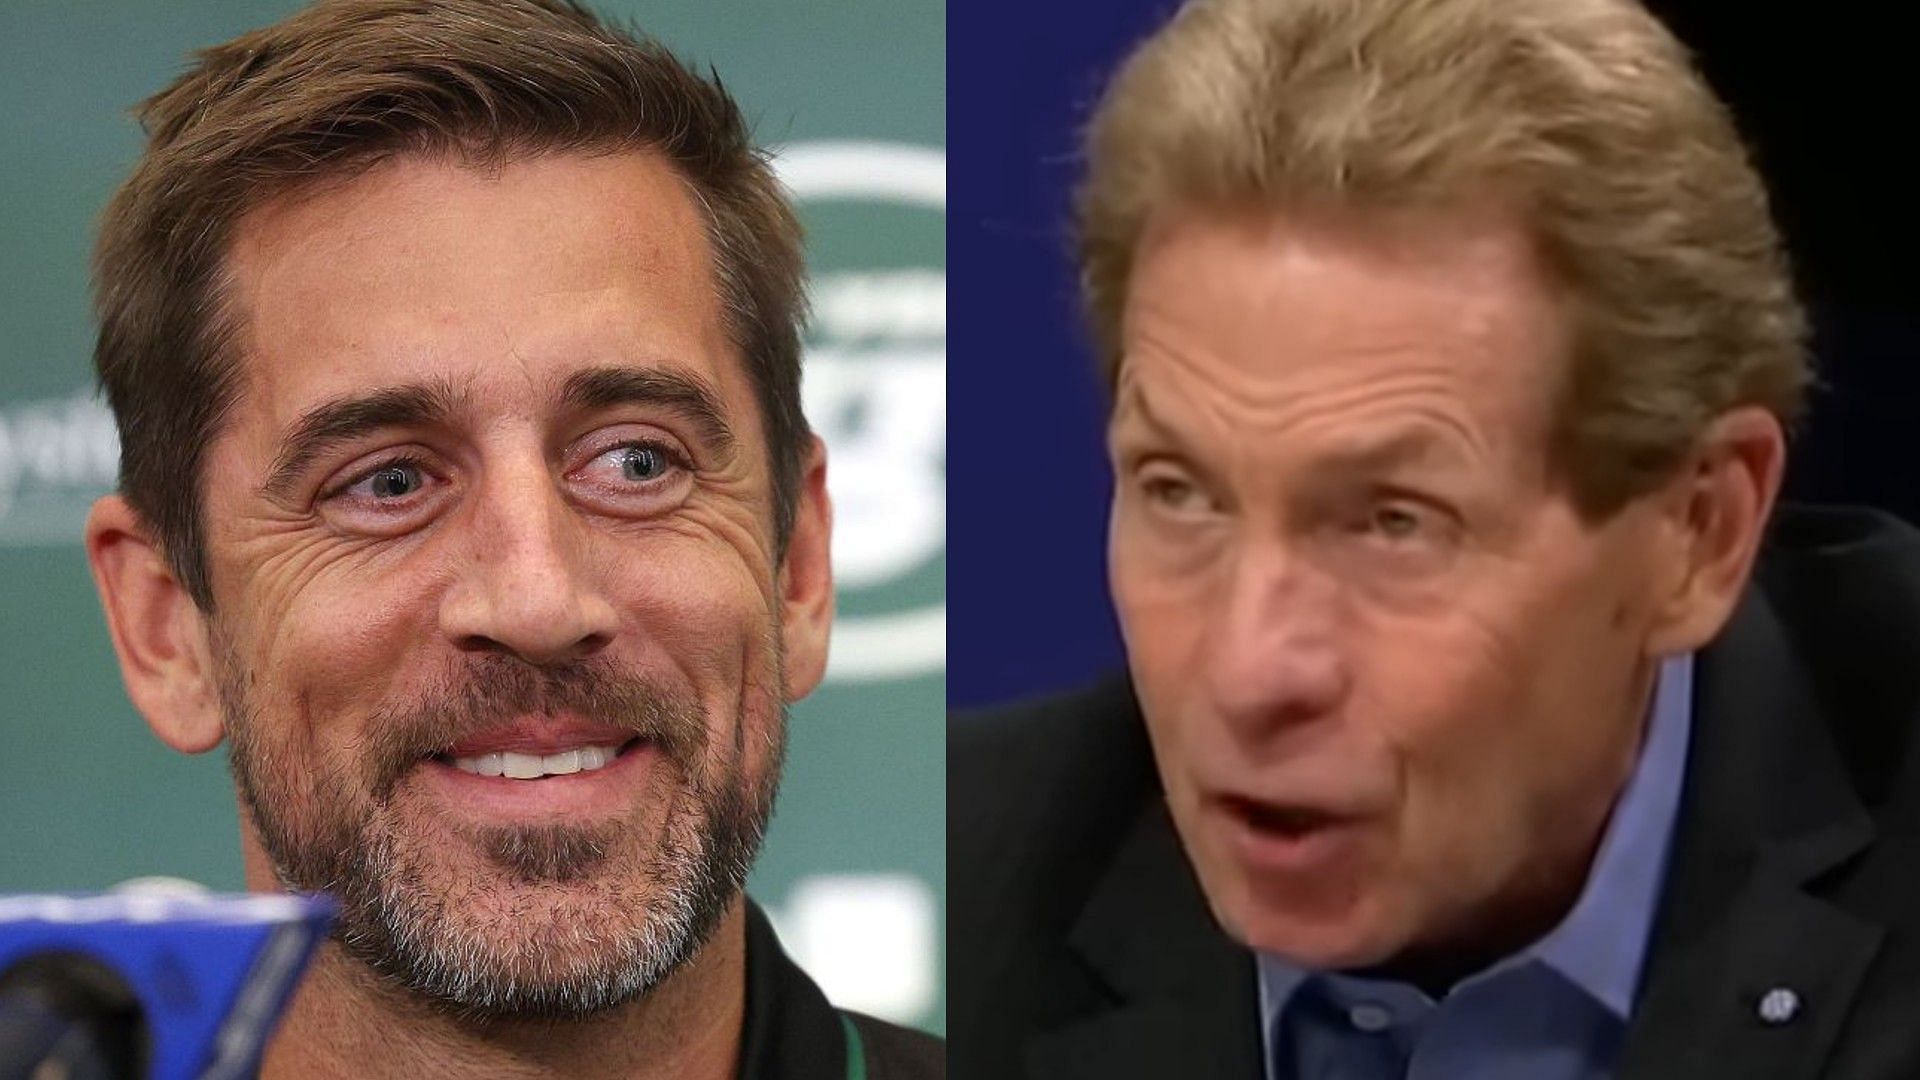 Skip Bayless hits Aaron Rodgers with new nickname